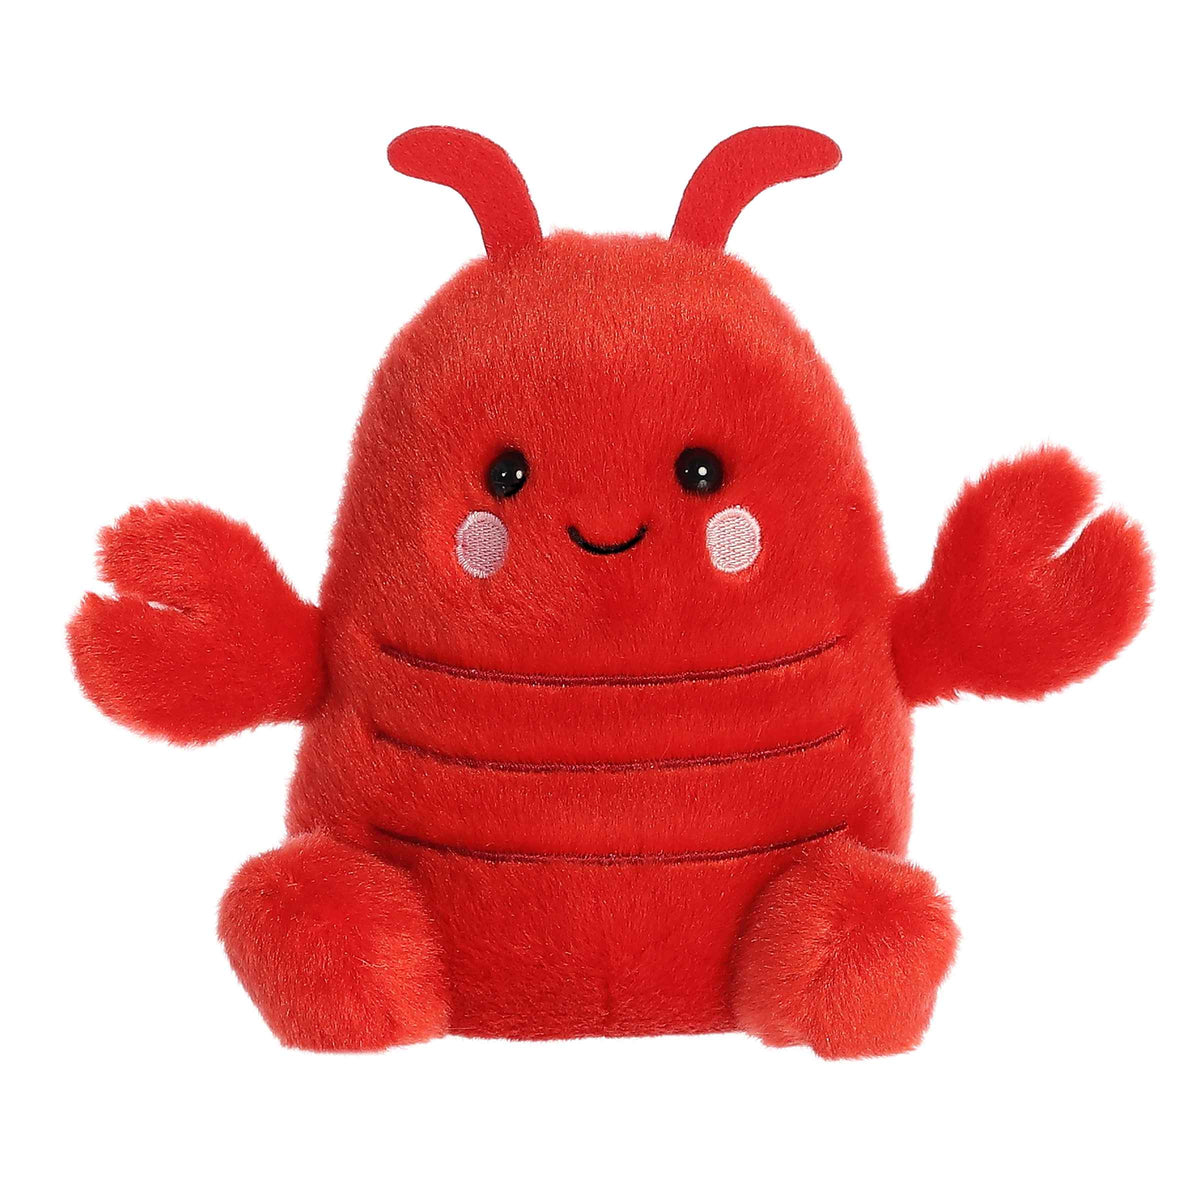 Clawford Lobster plush from Palm Pals, in luxurious crimson lobster red, embodies sophistication